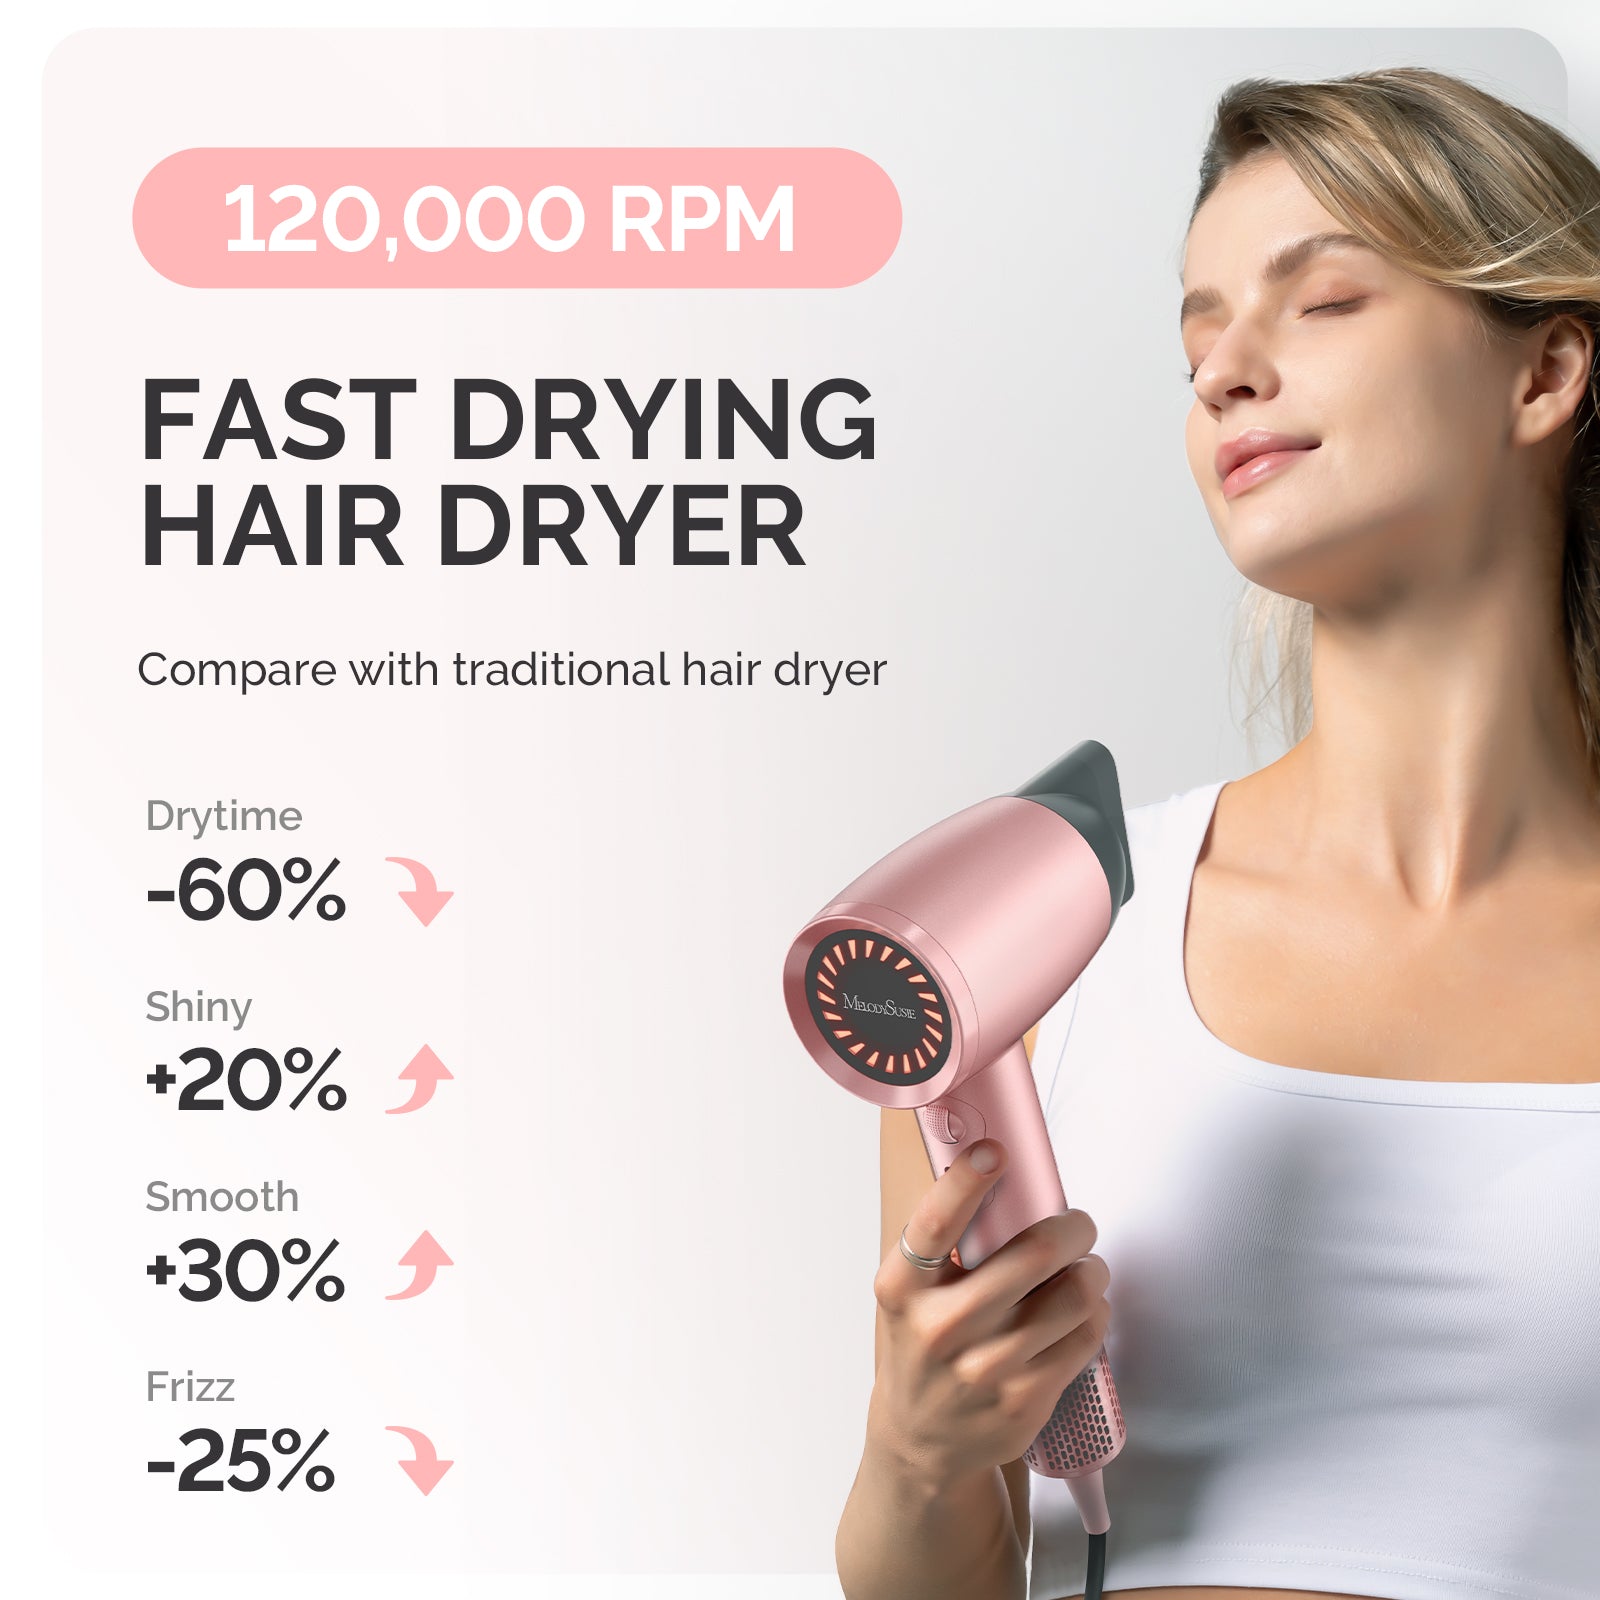 Portable Ionic Hair Dryer 120,000 RPM Gift Box - Pink (US ONLY)